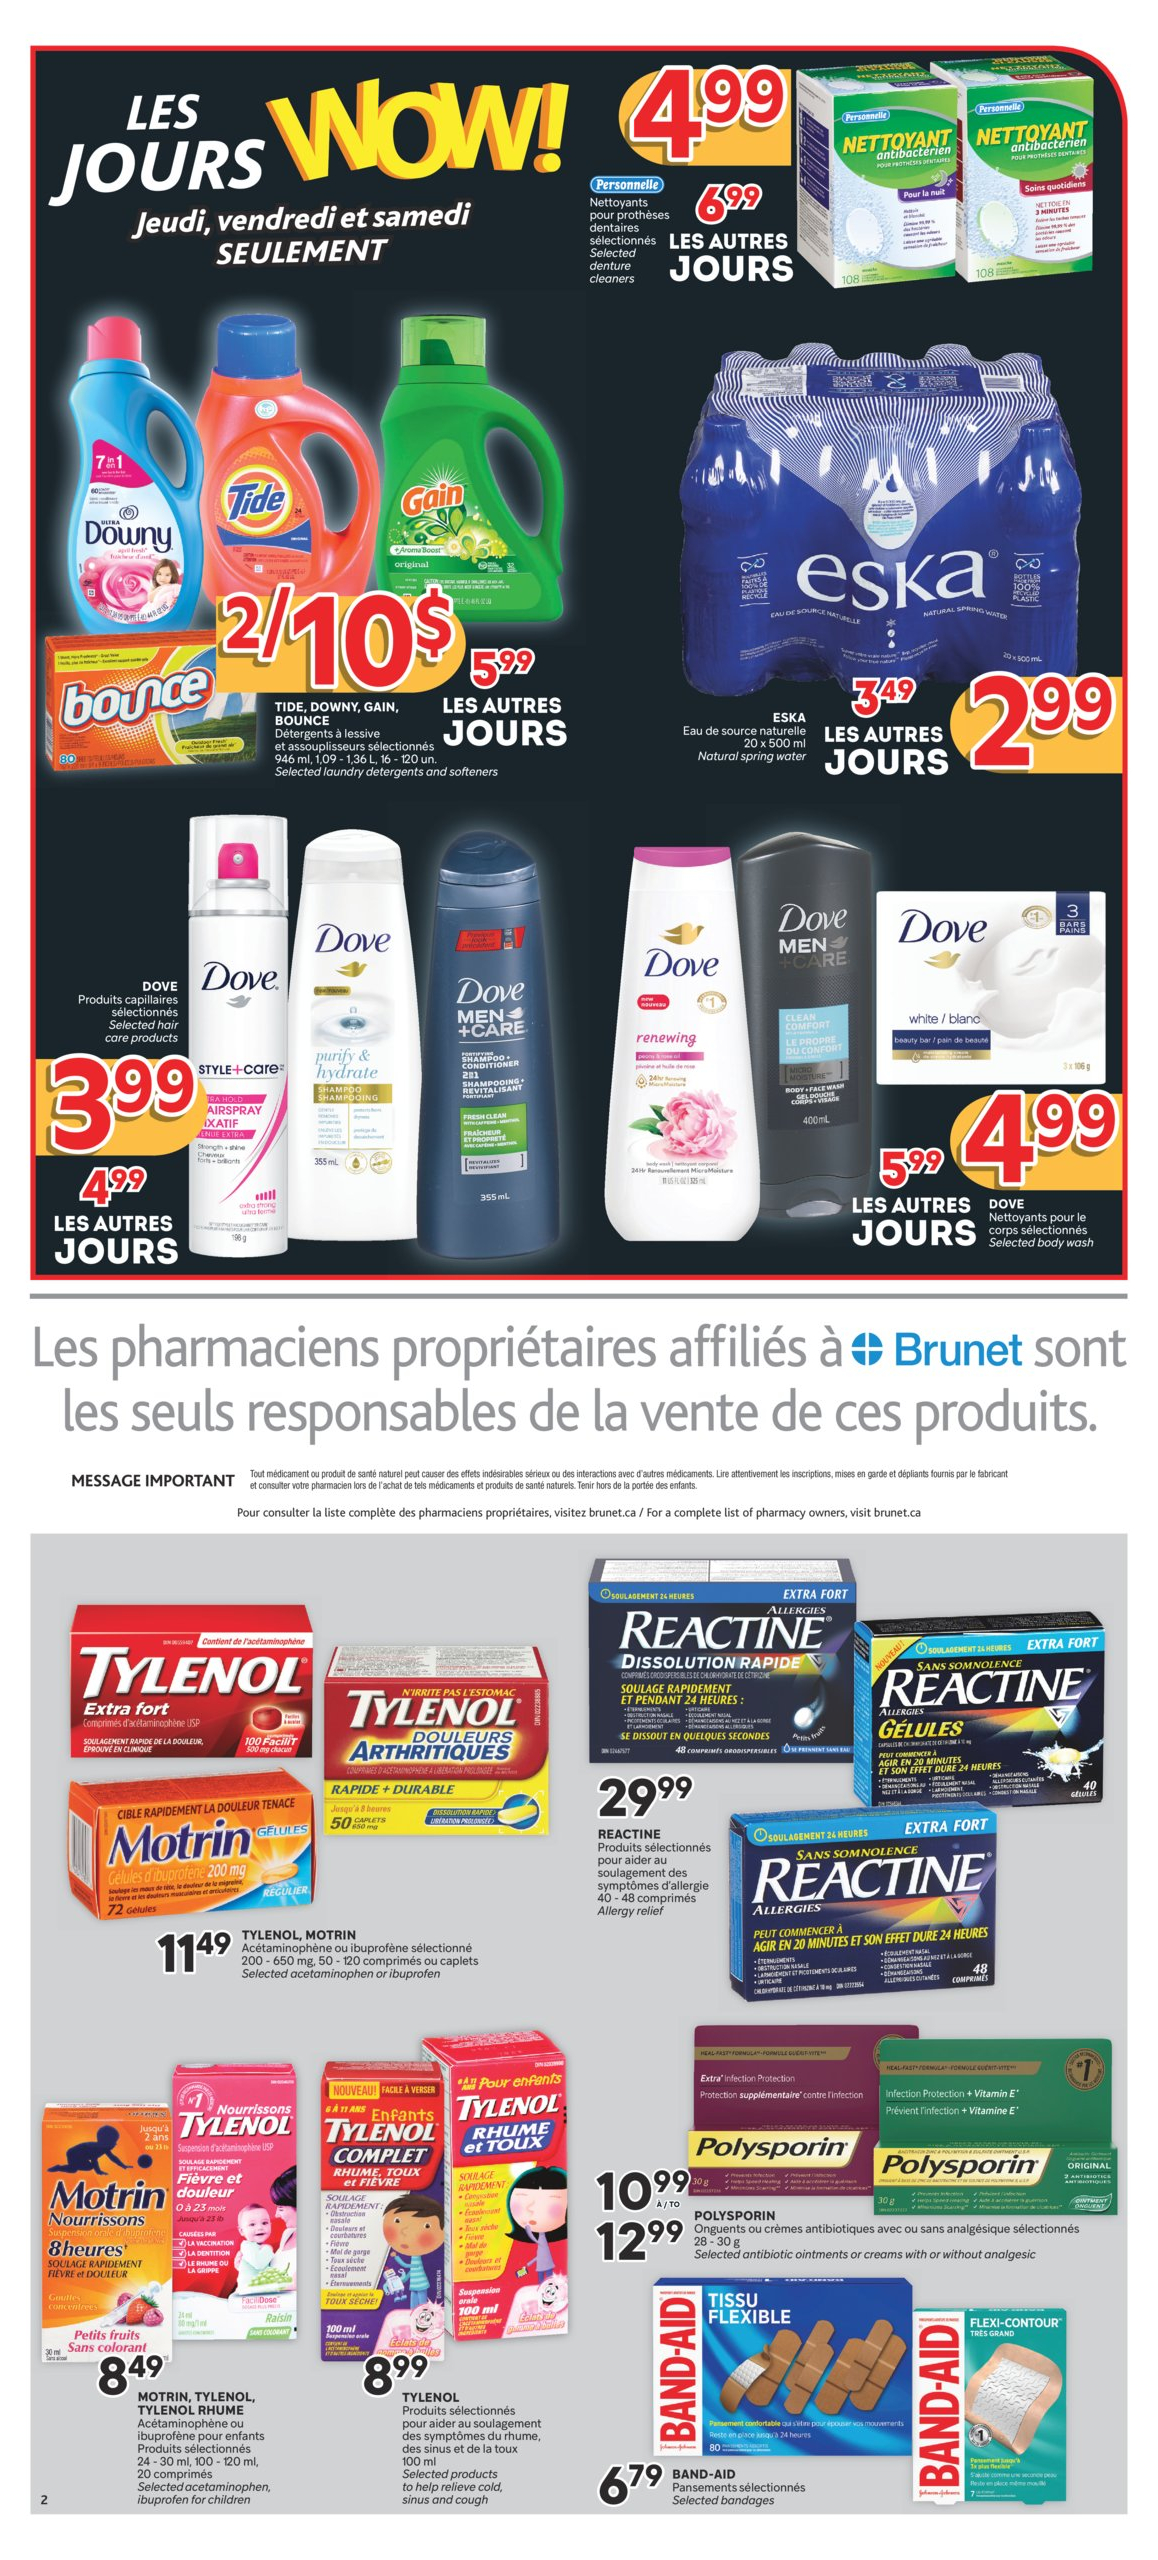 Circulaire Brunet - Pharmacie - Page 2